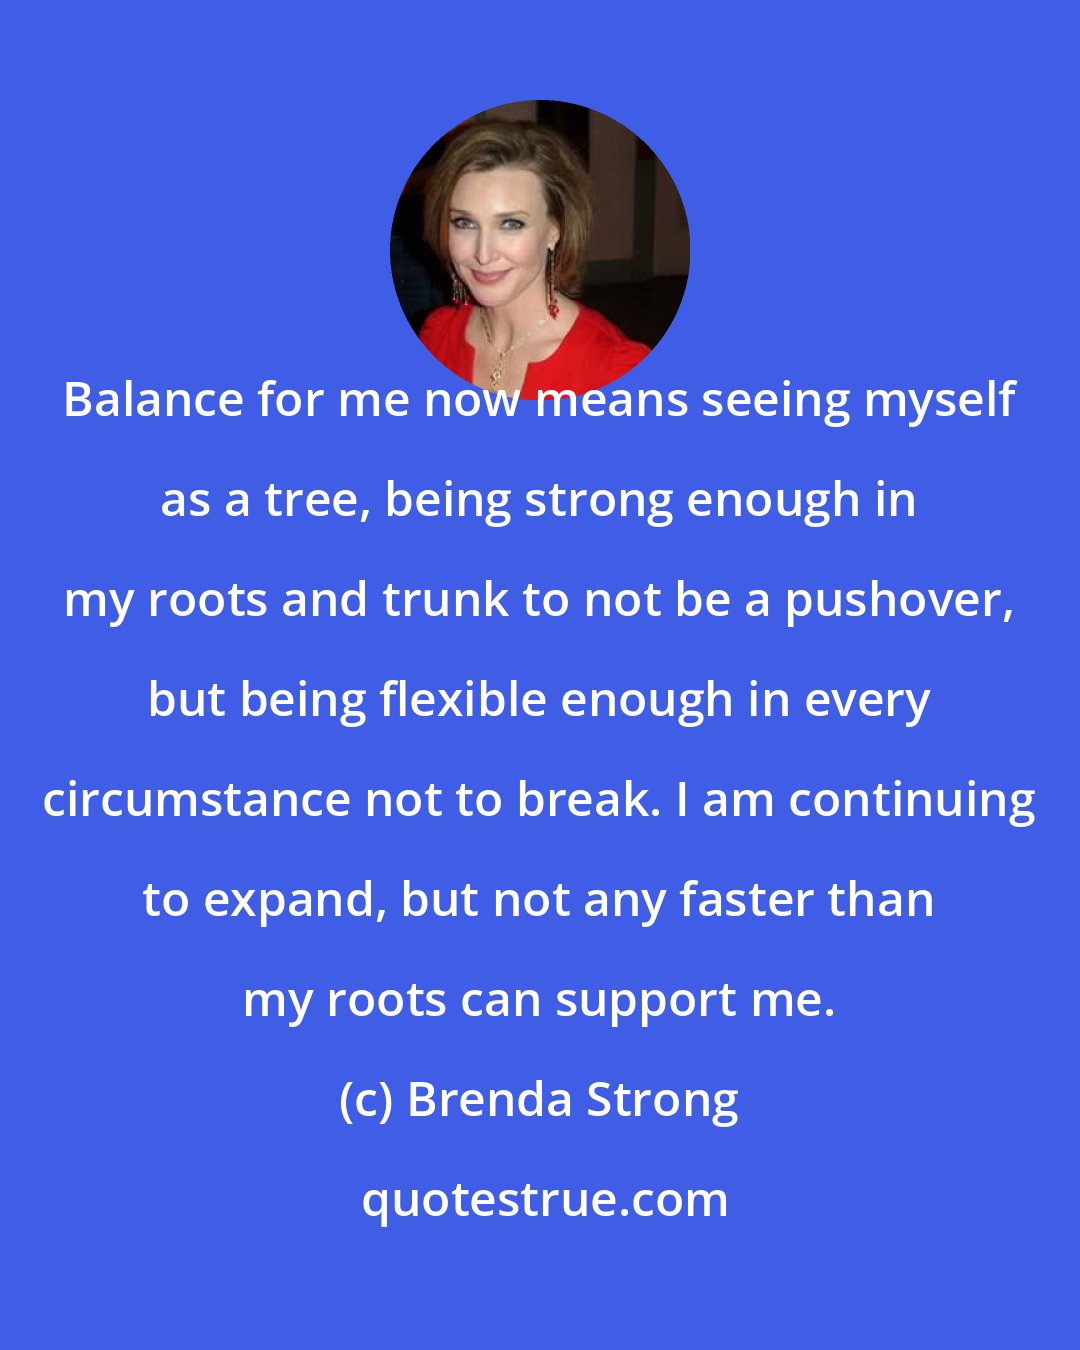 Brenda Strong: Balance for me now means seeing myself as a tree, being strong enough in my roots and trunk to not be a pushover, but being flexible enough in every circumstance not to break. I am continuing to expand, but not any faster than my roots can support me.